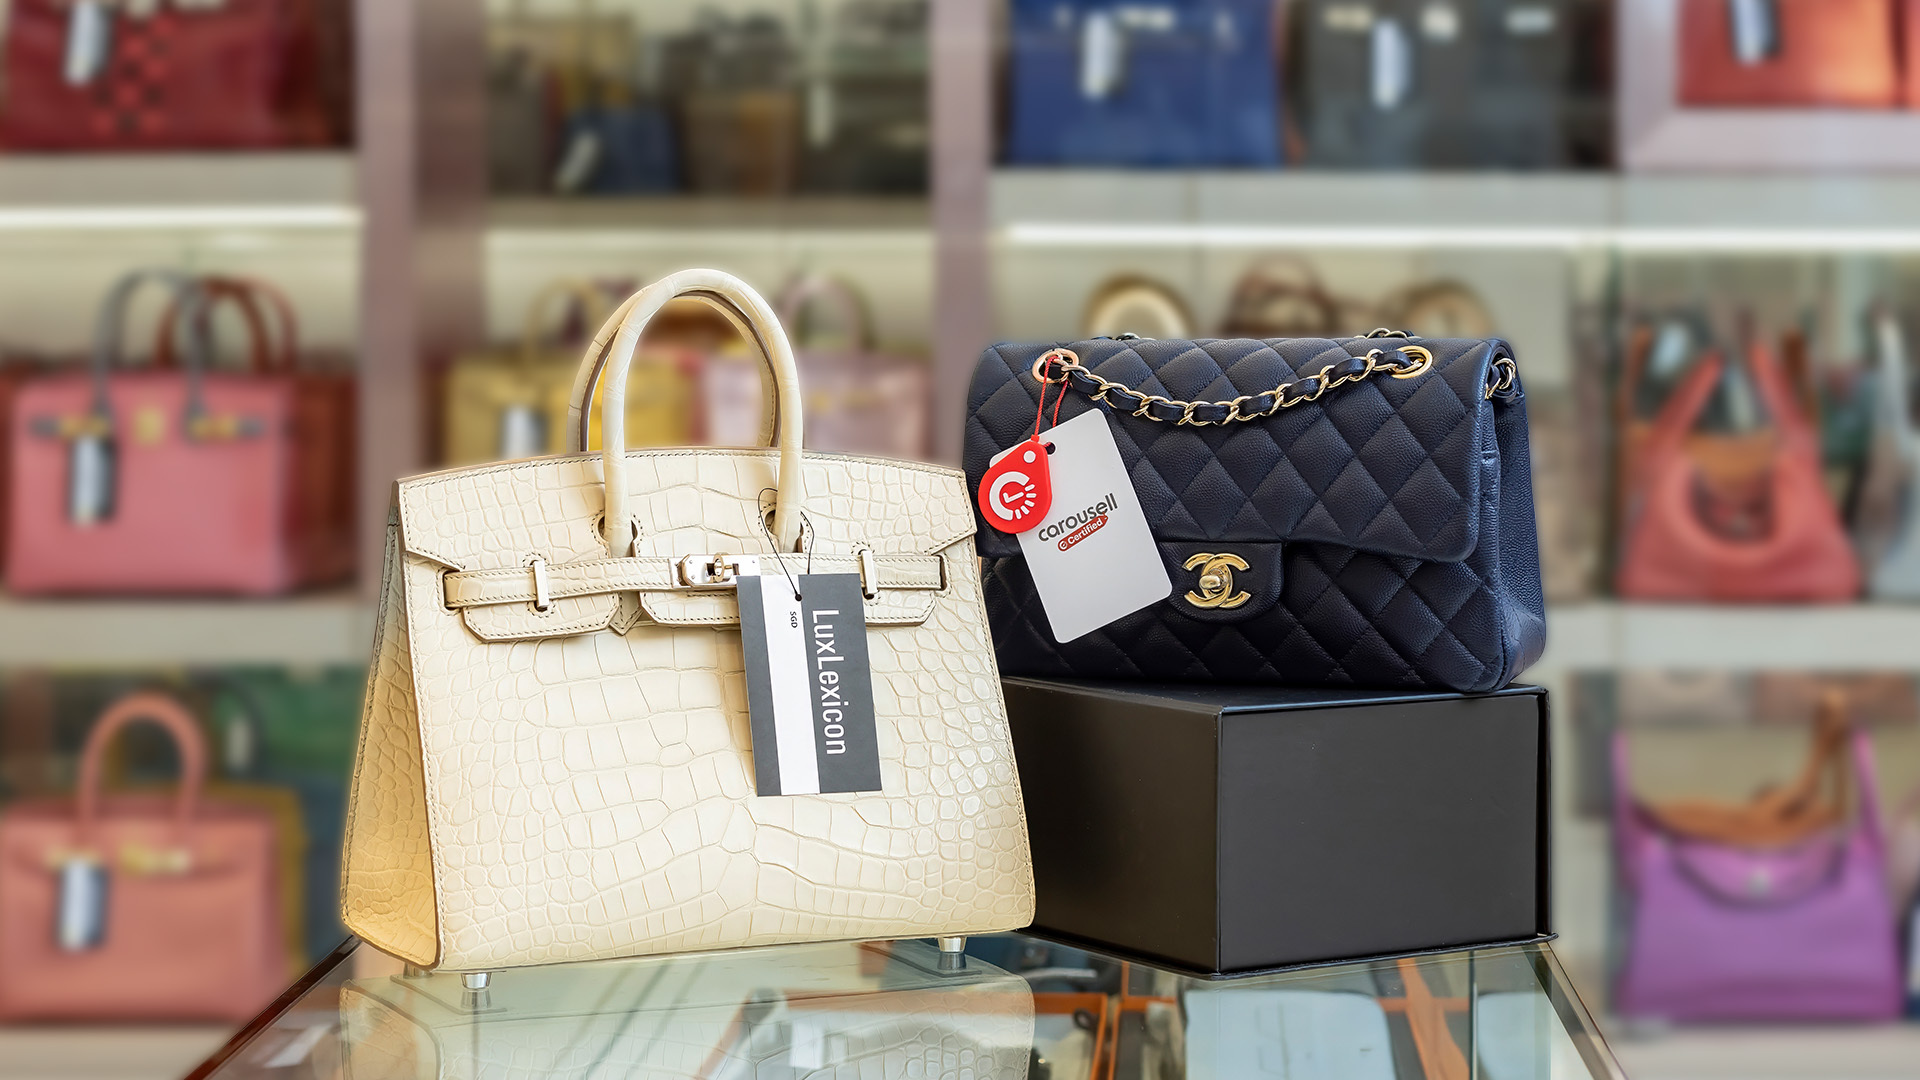 Carousell doubles down on luxury segment with new acquisition